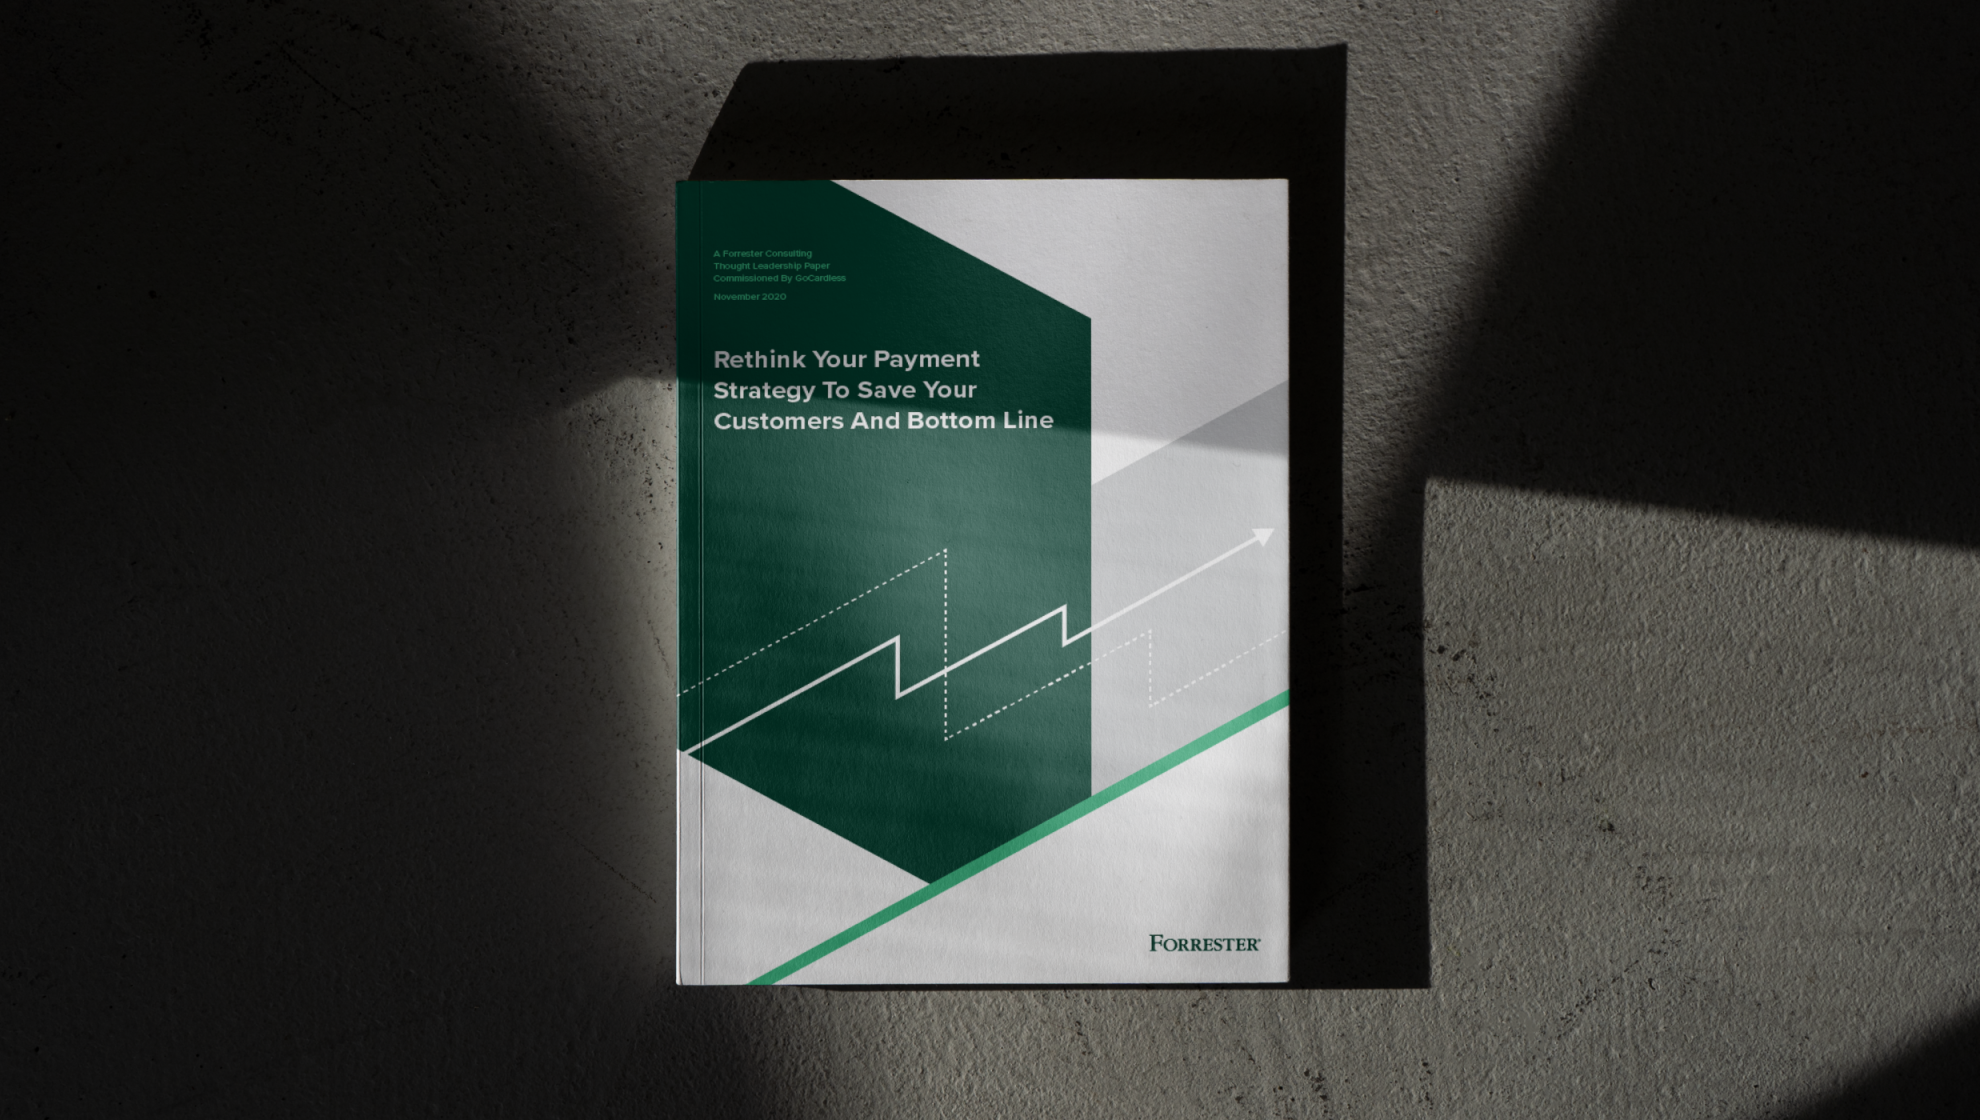 Forrester Consulting: Rethink Your Payment Strategy To Save Your Customers And Bottom Line